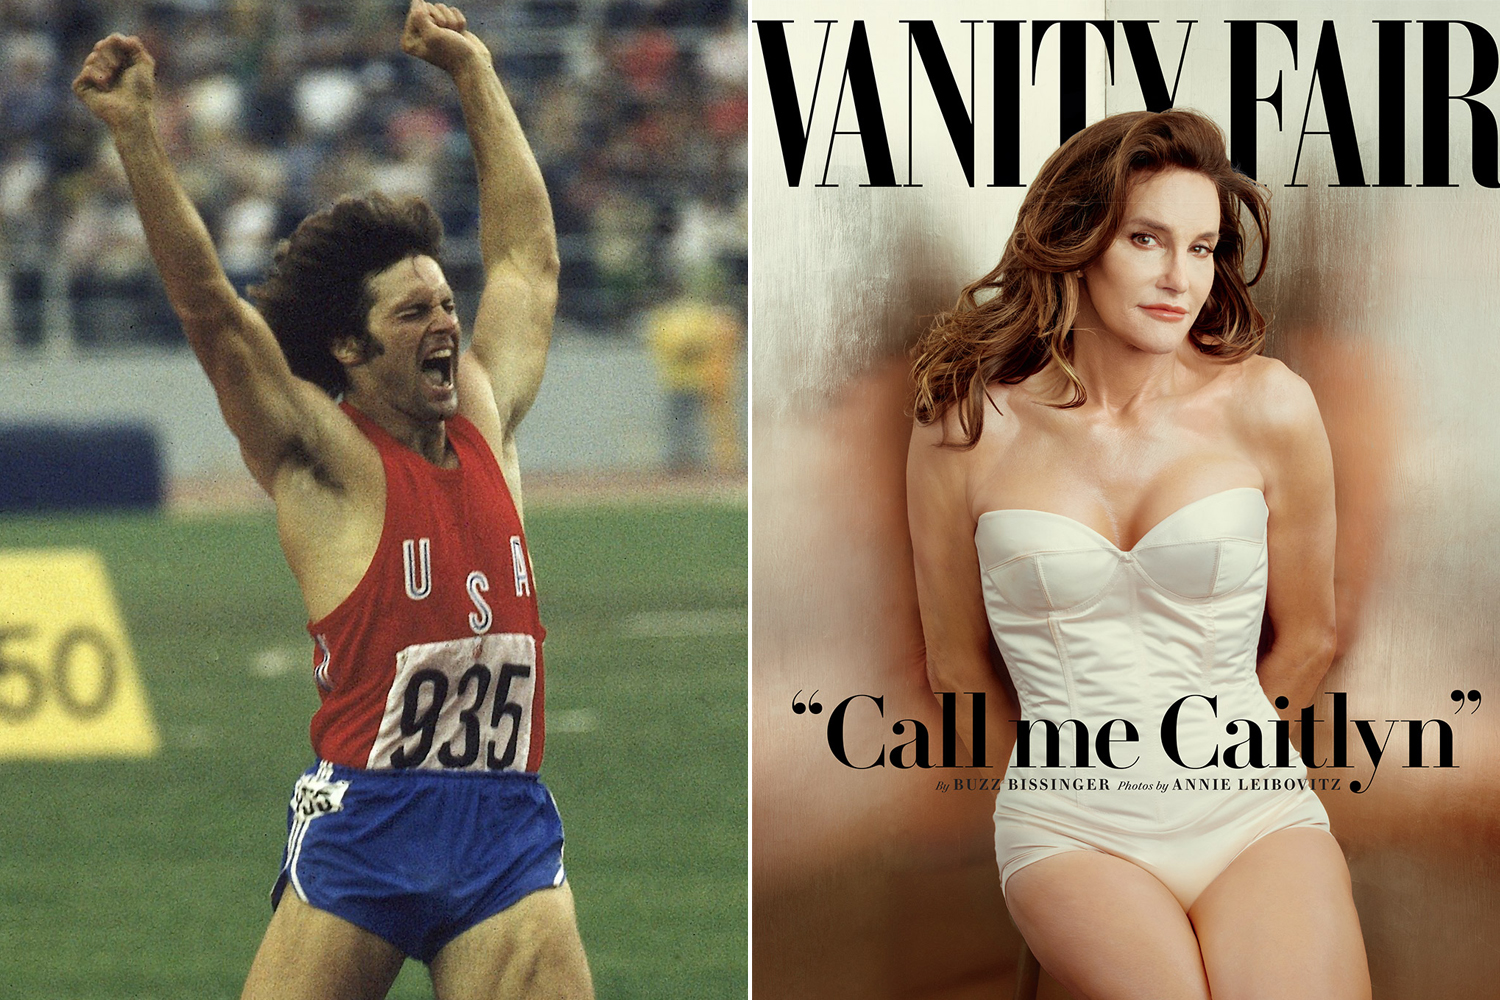 Since the crash Jenner has been making even more headlines. In July Bruce fully transitioned into a woman, becoming Caitlyn Jenner, and appearing on the cover of Vanity Fair.